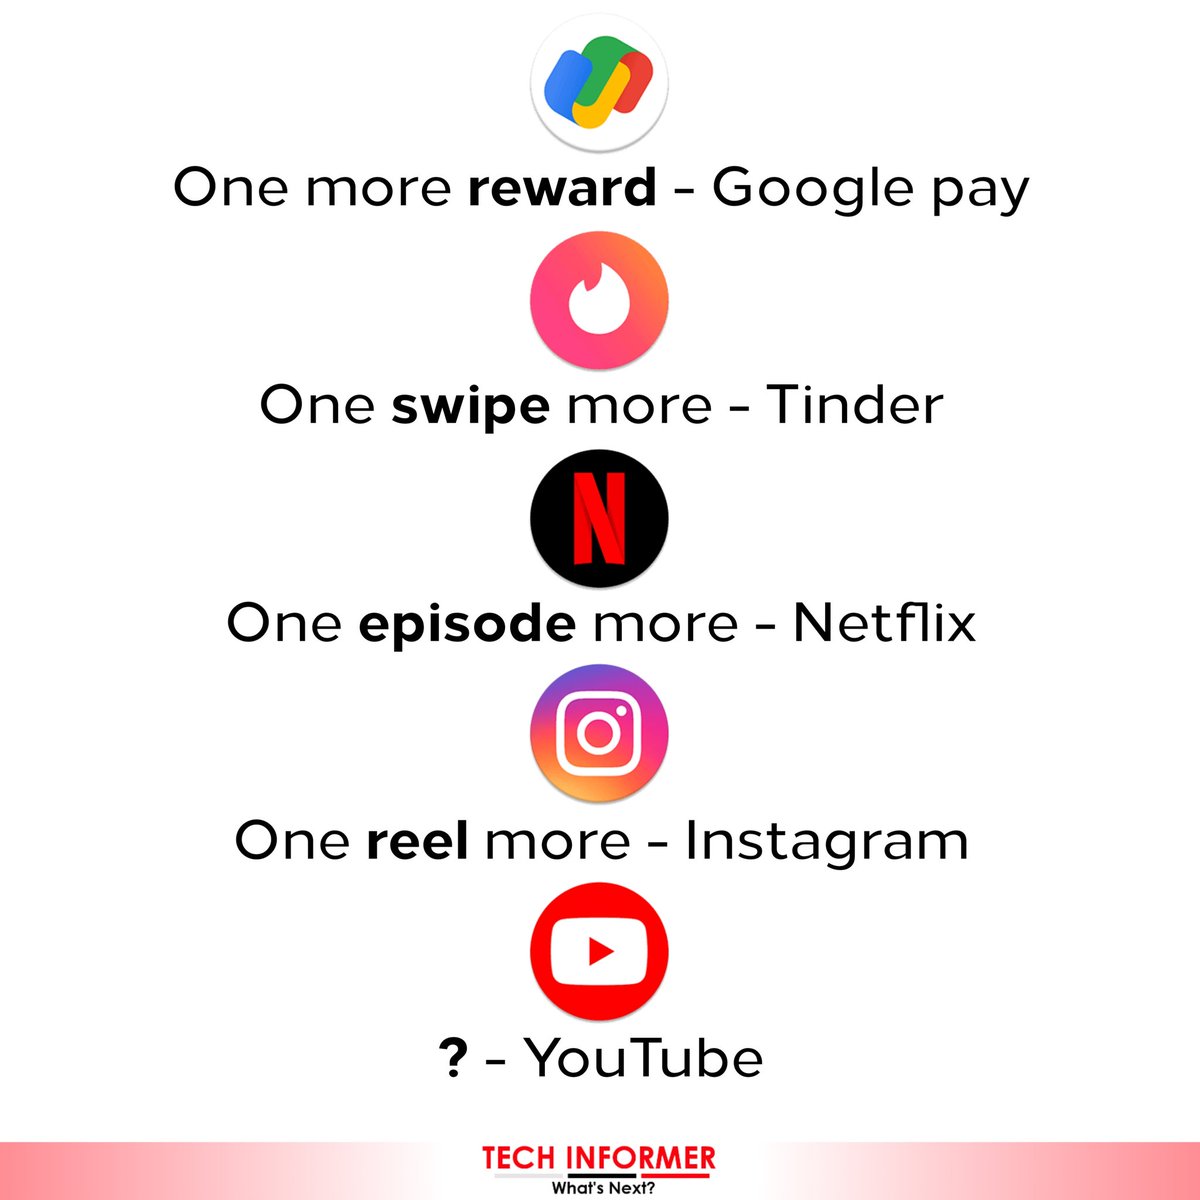 Tell us in the comment section
#Techinformer #YouTube #GooglePay #Netflix #Tinder #Instagram